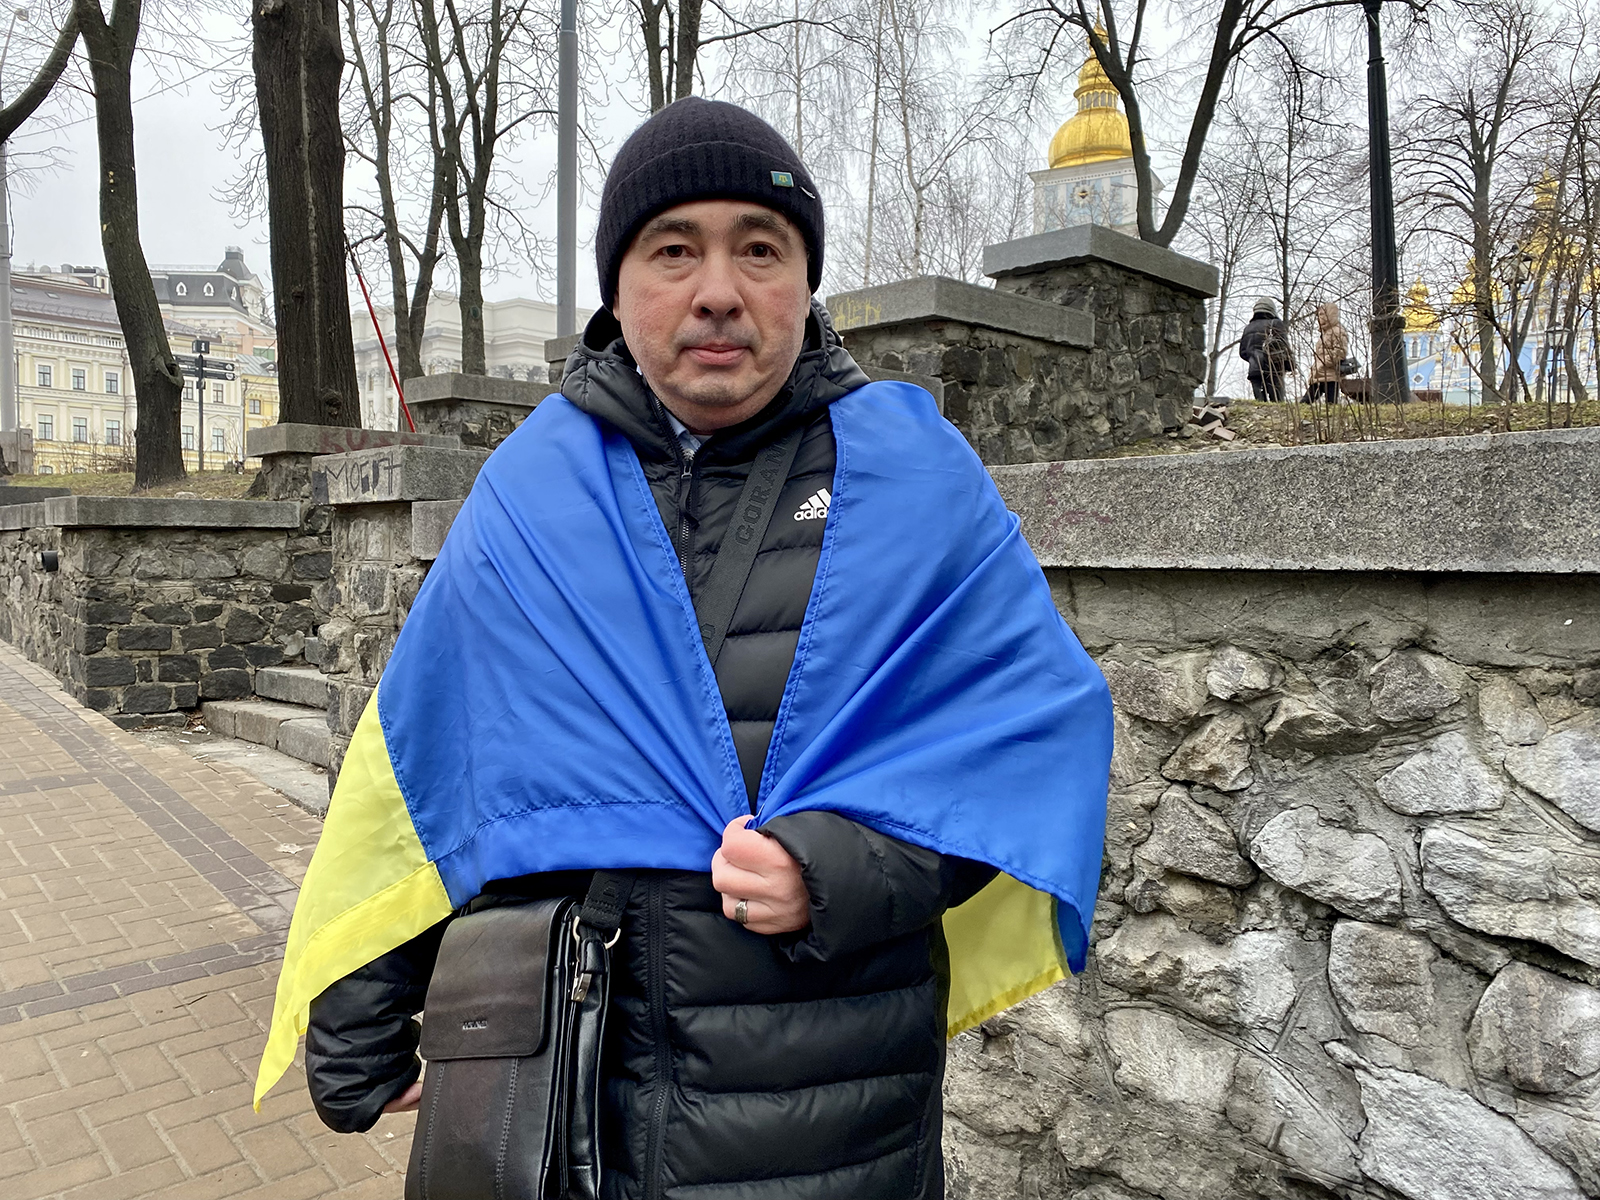 Alim, from Crimea, says he has carried his Ukrainian flag every day for eight years since Russia annexed the peninsula.